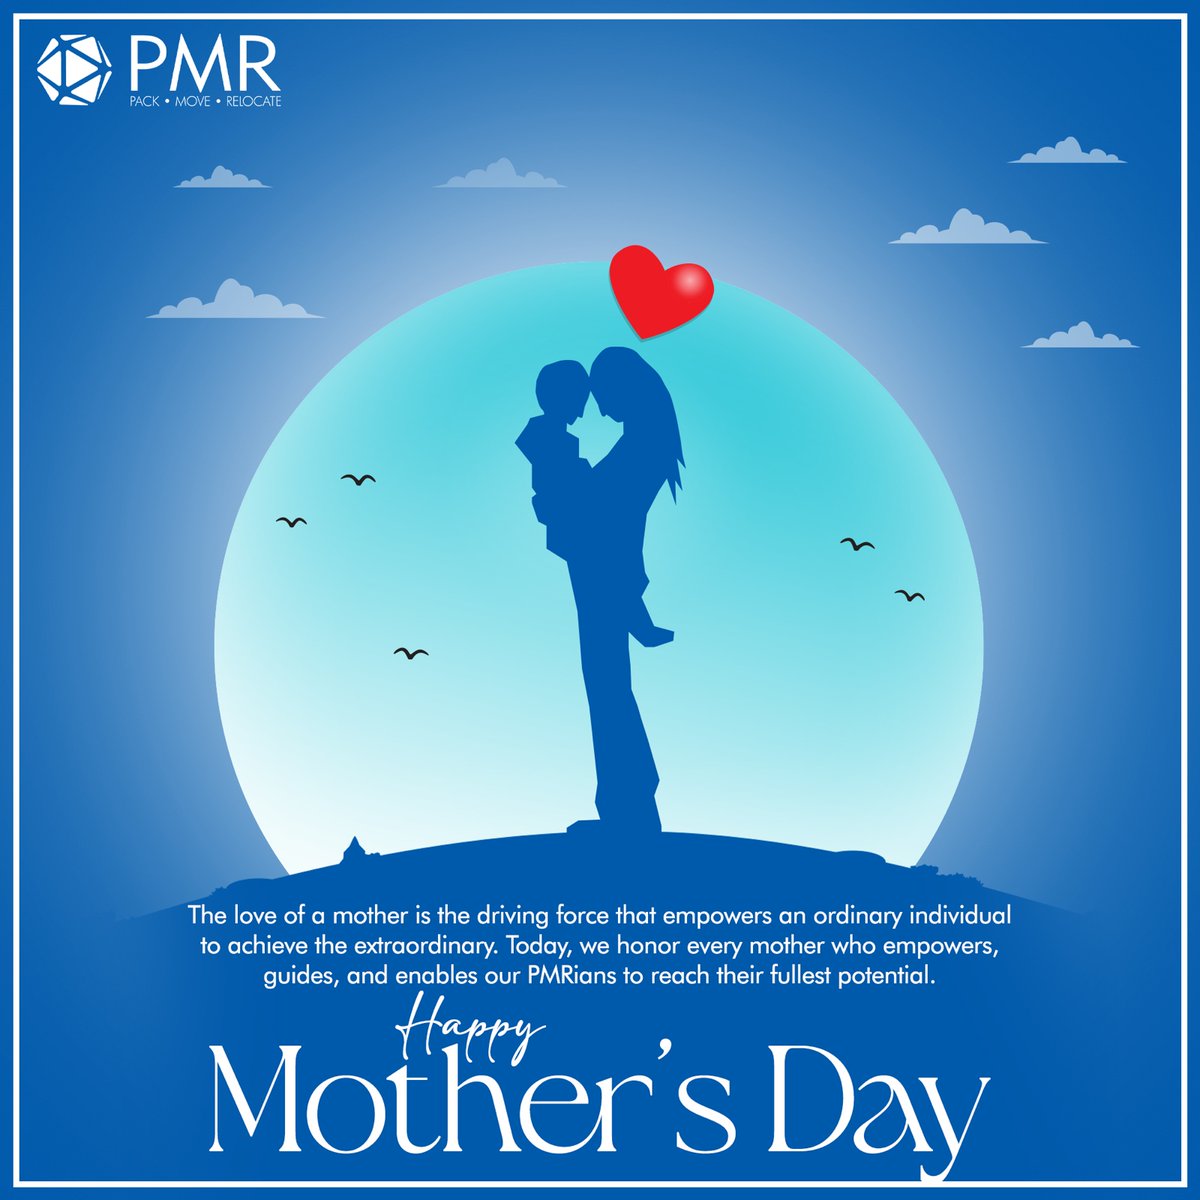 HAPPY MOTHER’S DAY
Recognising and appreciating all our hard working mother in the PMR family and those who silently support us all.
#pmr #pmrelocations #mothersday #mom #Mothersday2024 #appreciatingmothers #celebration #pmrian #globalmobility #globalmover #relocationspecialist